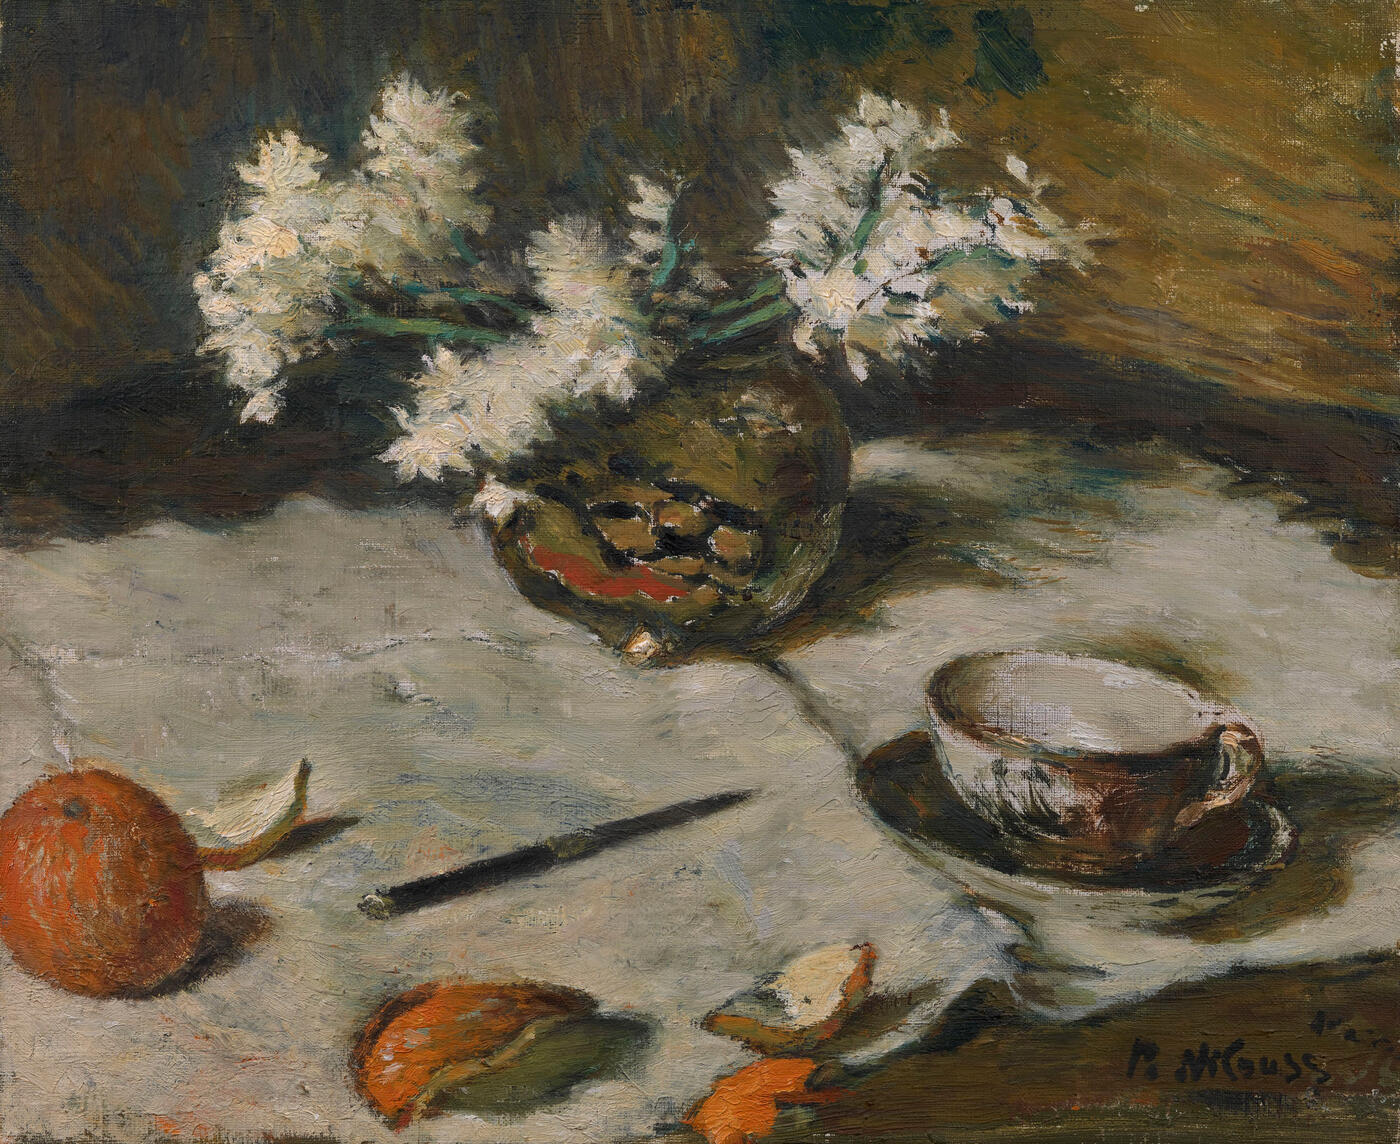 Still Life with an Orange and a Teacup